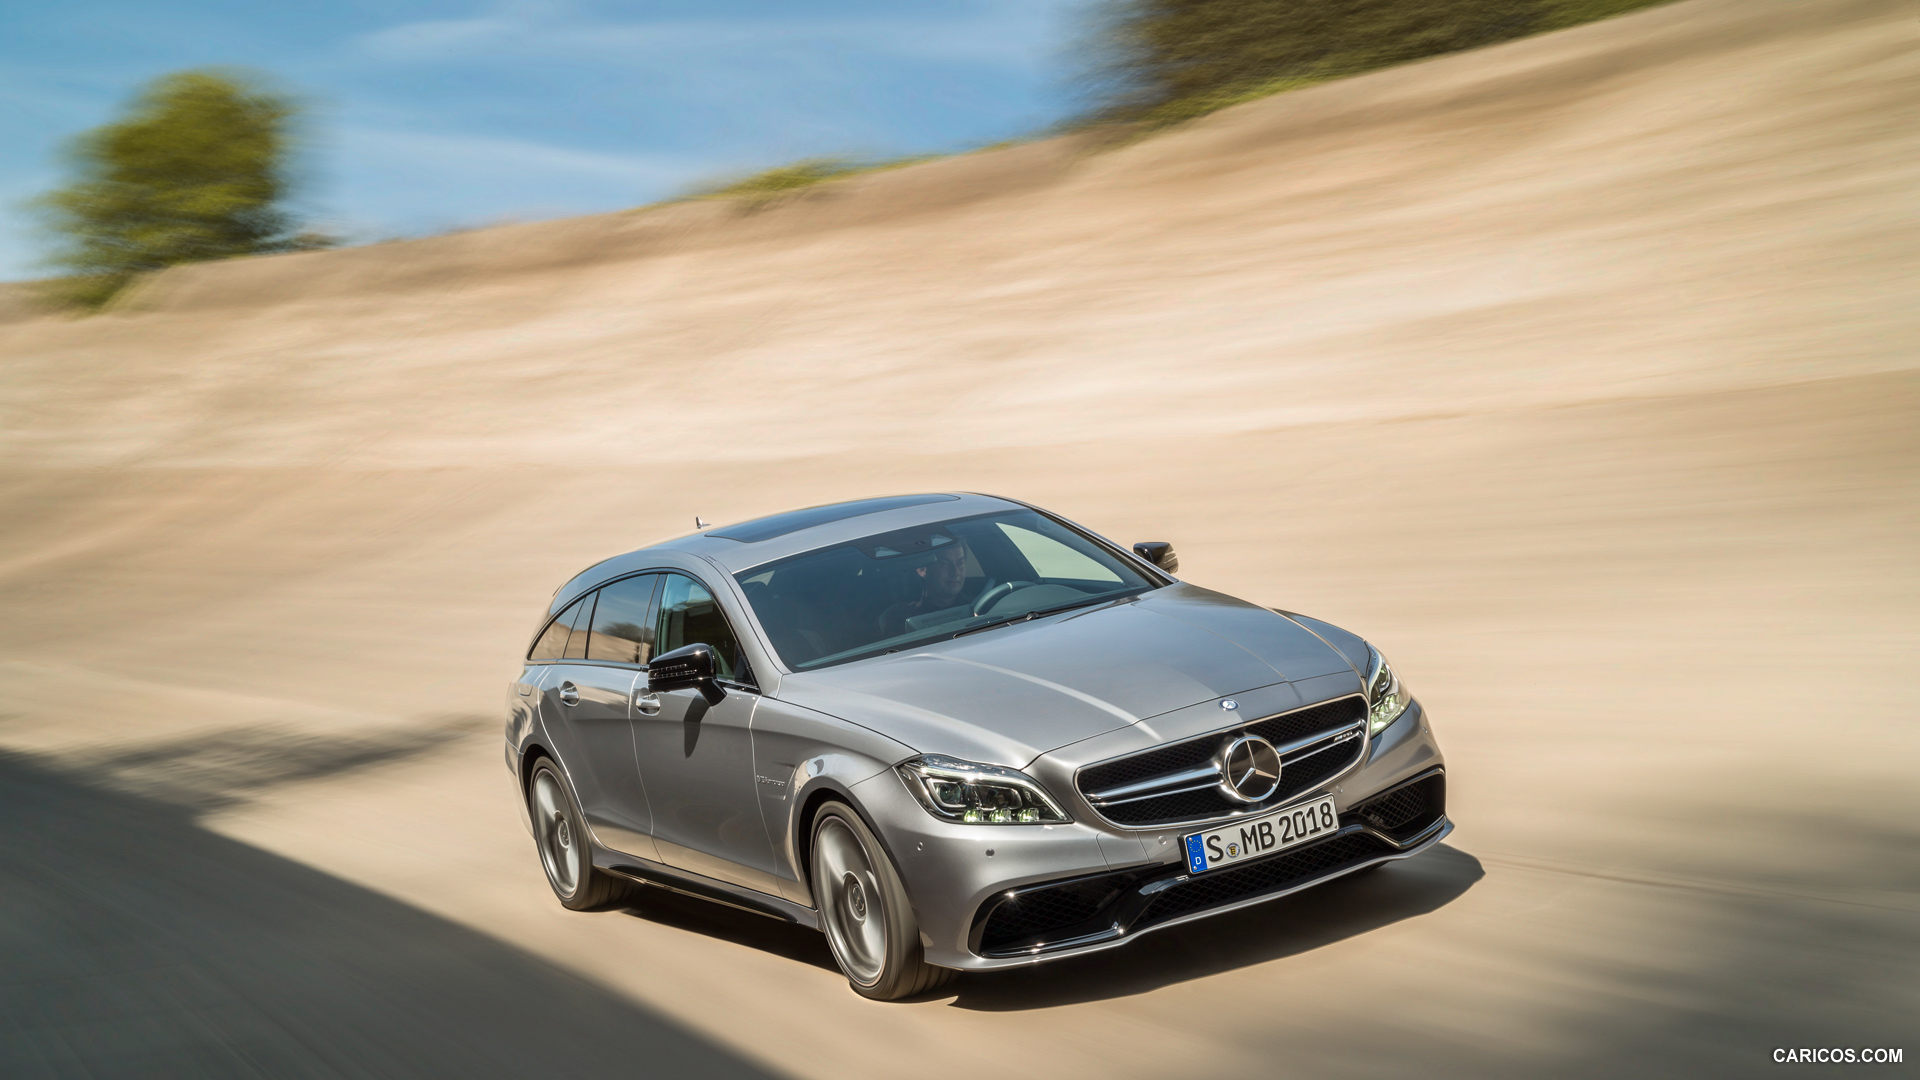 2015 Mercedes-Benz CLS 63 AMG Shooting Brake S-Model - Front, #13 of 52